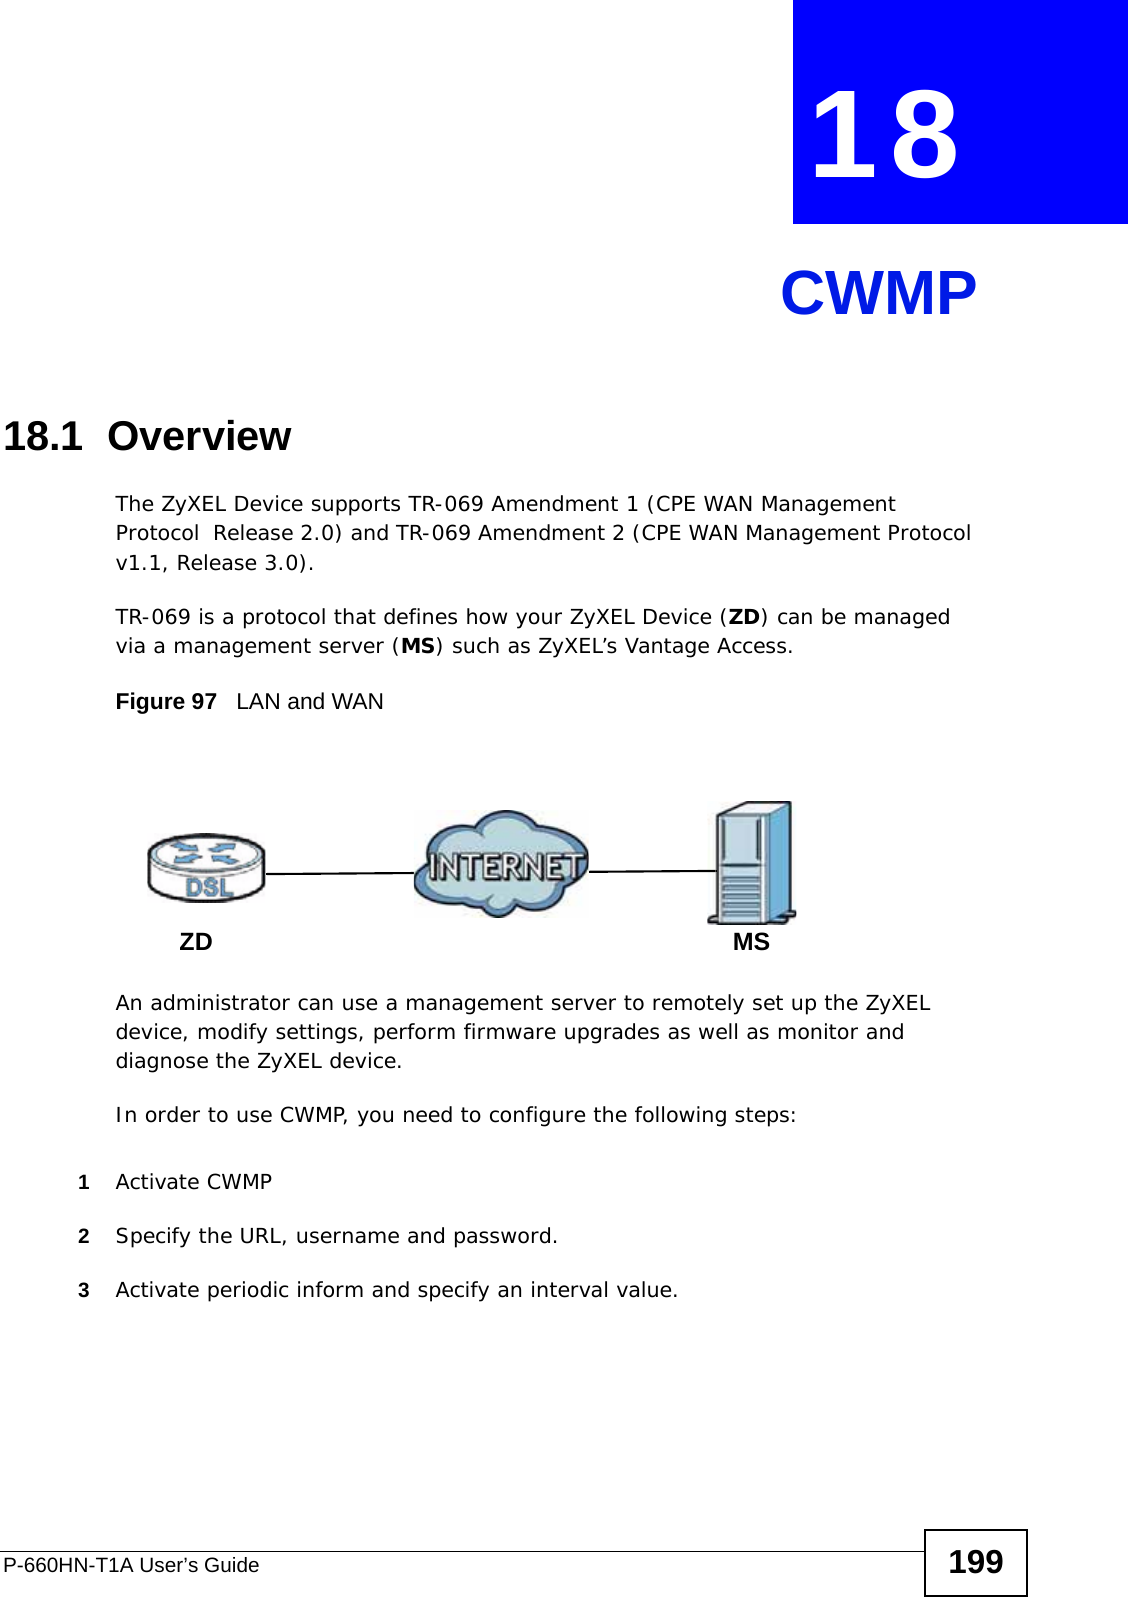 P-660HN-T1A User’s Guide 199CHAPTER  18 CWMP18.1  OverviewThe ZyXEL Device supports TR-069 Amendment 1 (CPE WAN Management Protocol  Release 2.0) and TR-069 Amendment 2 (CPE WAN Management Protocol v1.1, Release 3.0).TR-069 is a protocol that defines how your ZyXEL Device (ZD) can be managed via a management server (MS) such as ZyXEL’s Vantage Access. Figure 97   LAN and WANAn administrator can use a management server to remotely set up the ZyXEL device, modify settings, perform firmware upgrades as well as monitor and diagnose the ZyXEL device. In order to use CWMP, you need to configure the following steps:1Activate CWMP2Specify the URL, username and password.3Activate periodic inform and specify an interval value.MSZD